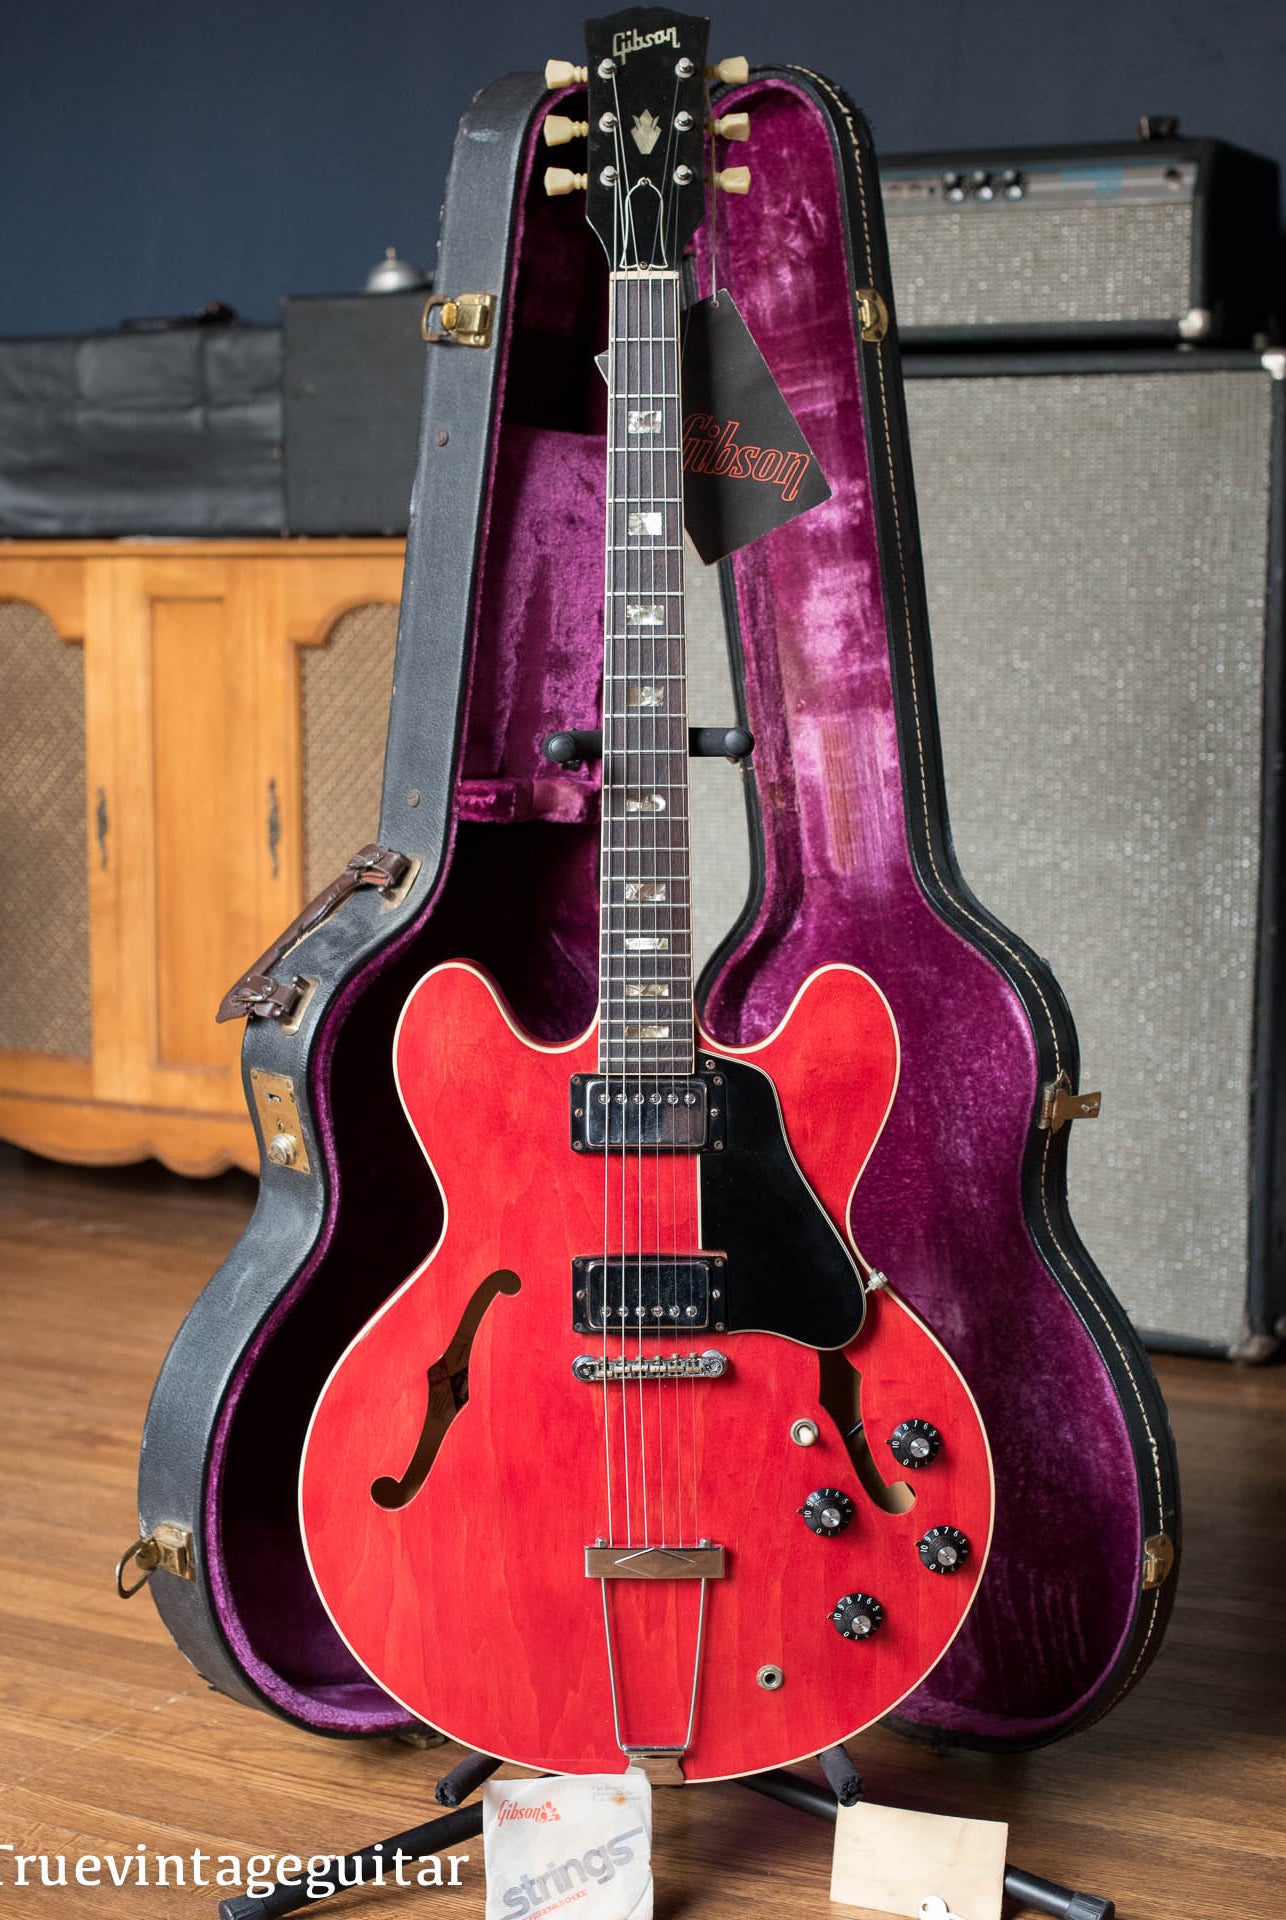 Vintage 1974 Gibson ES-335 Cherry Red electric guitar